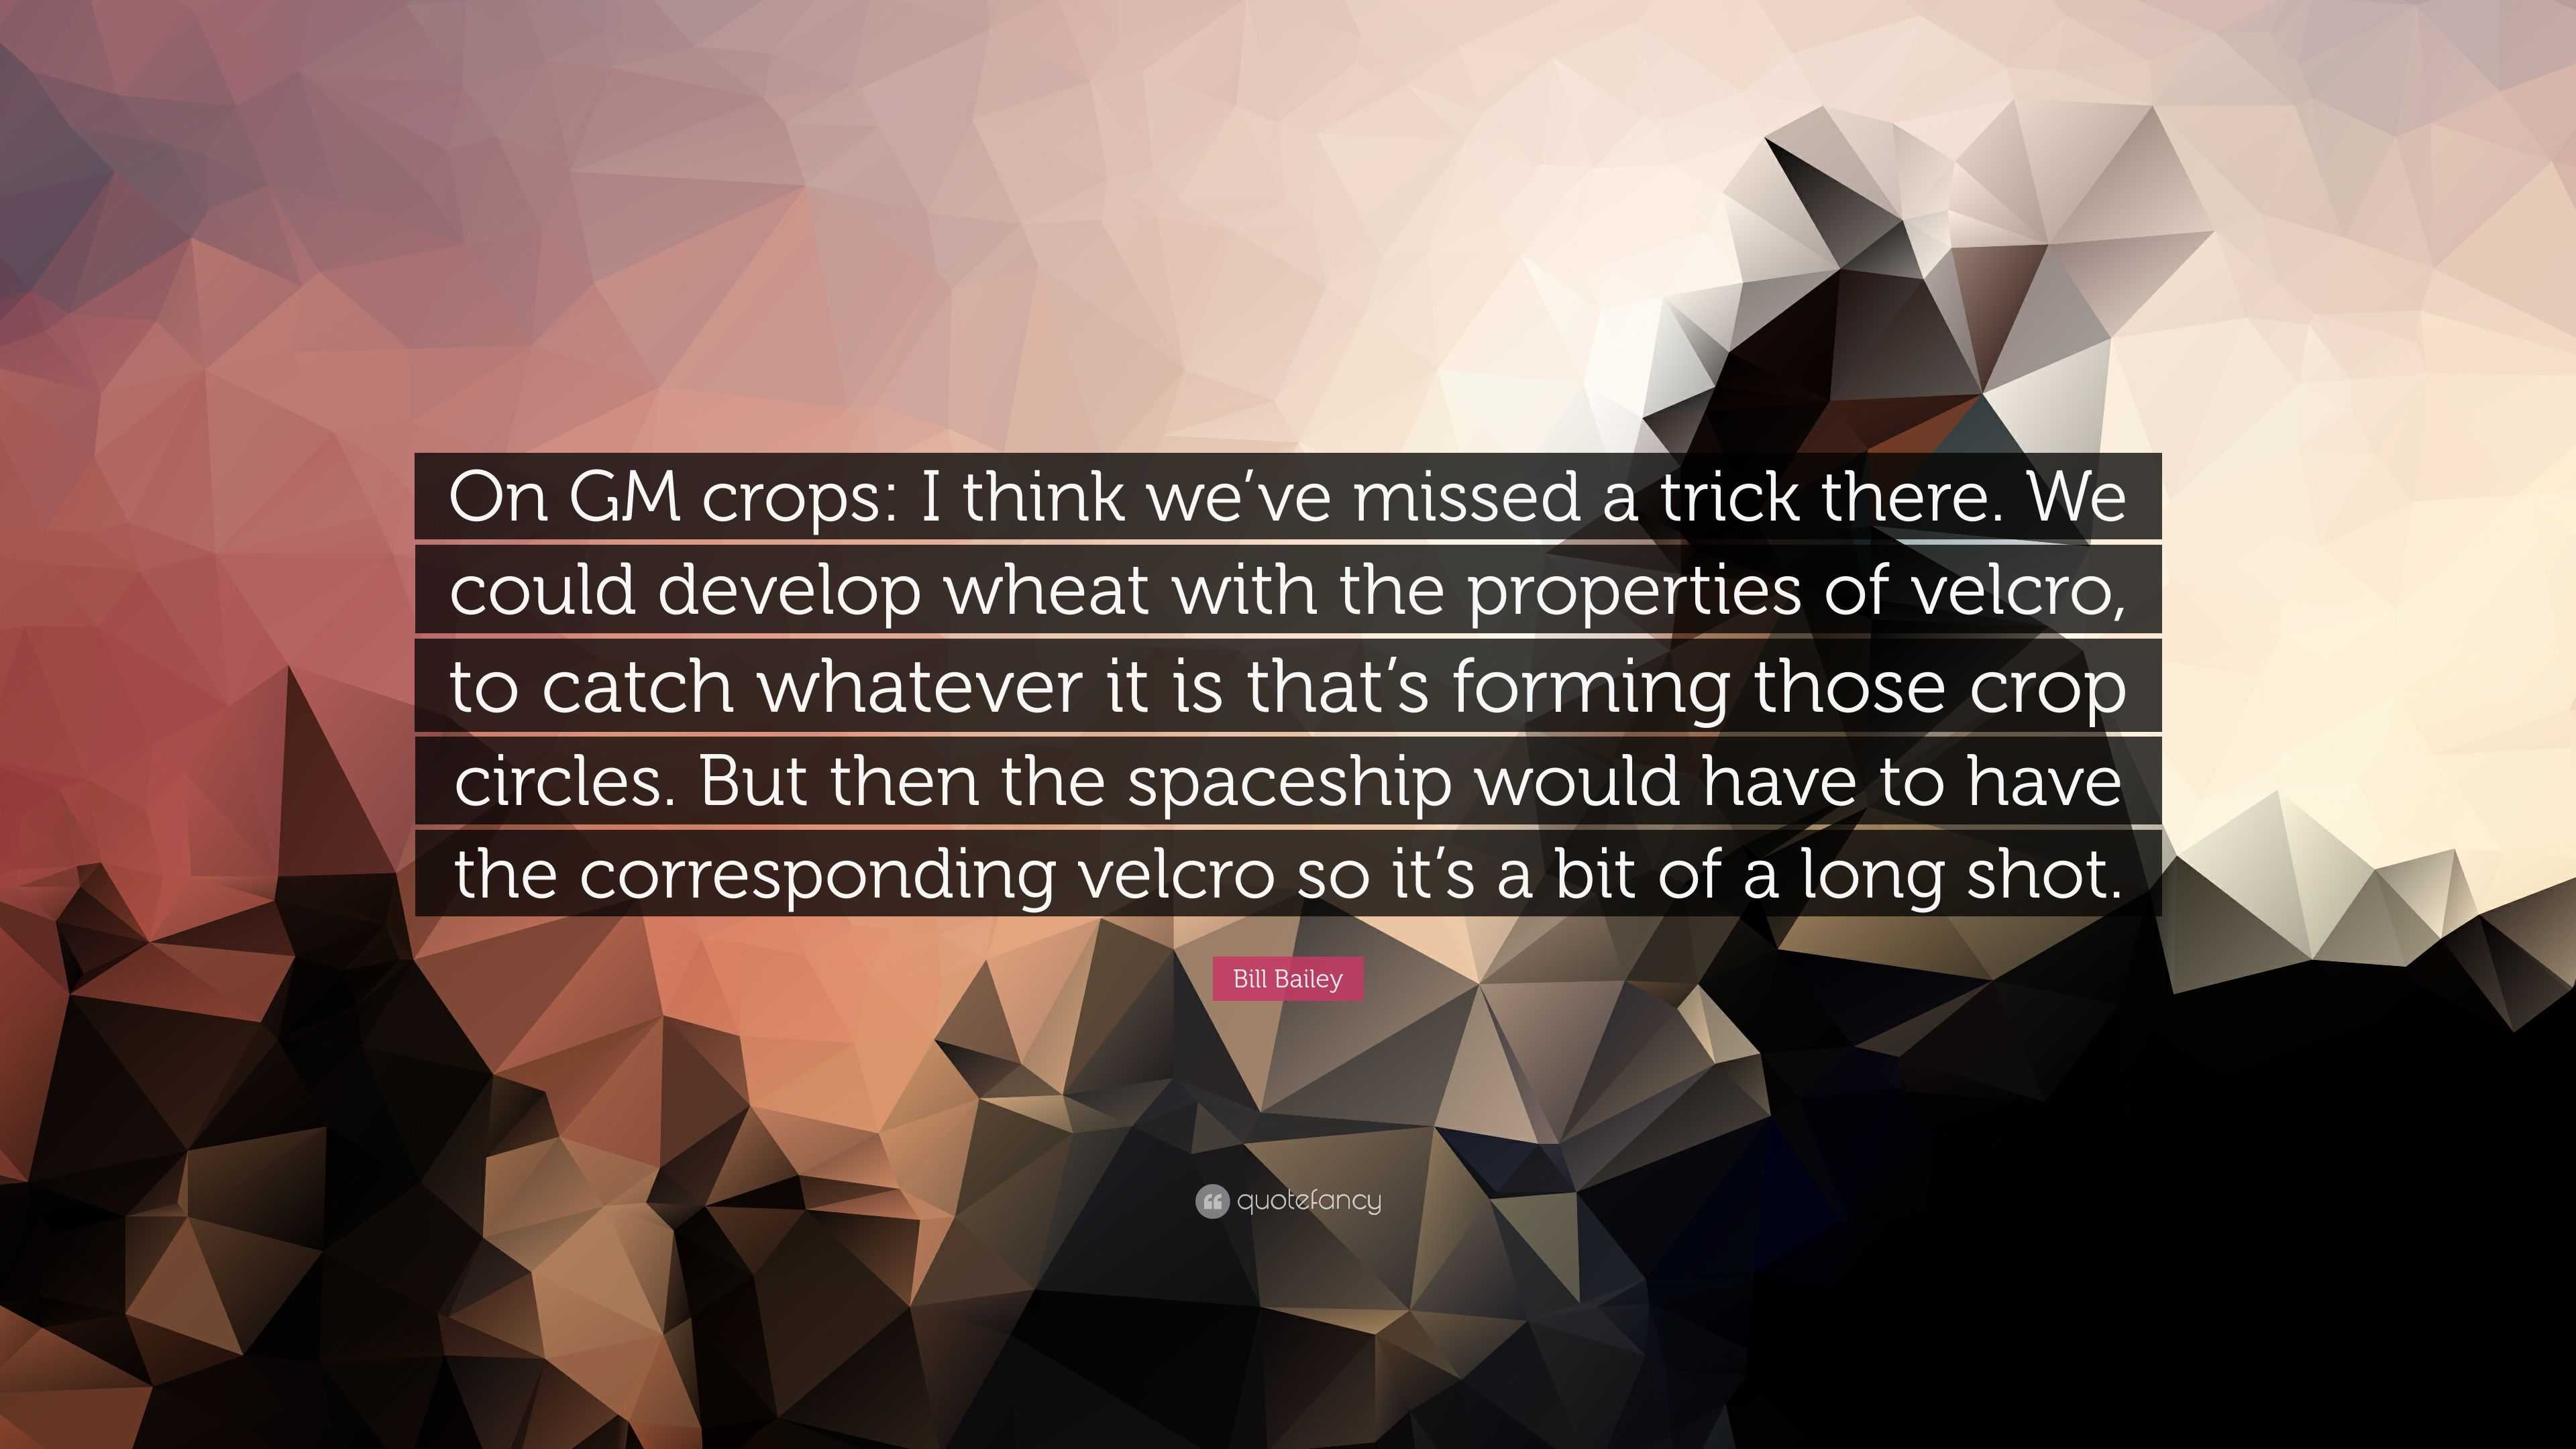 person Læring reaktion Bill Bailey Quote: “On GM crops: I think we've missed a trick there. We  could develop wheat with the properties of velcro, to catch whatever...”